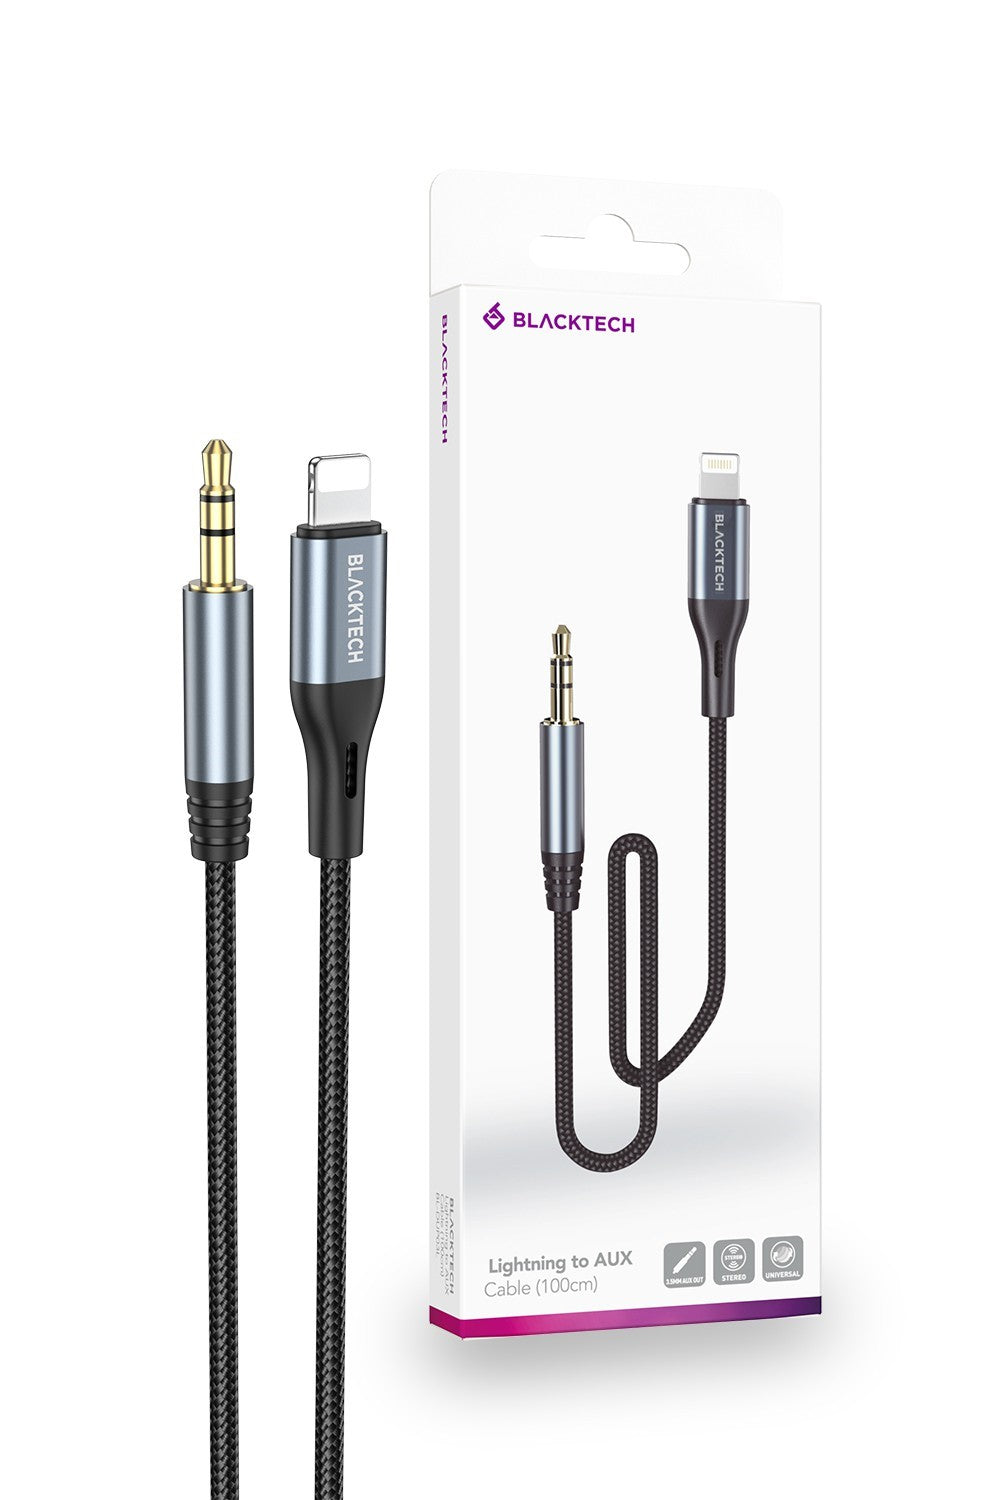 Blacktech Lightning for 3.5mm AUX Nylon Cable - 1 metre